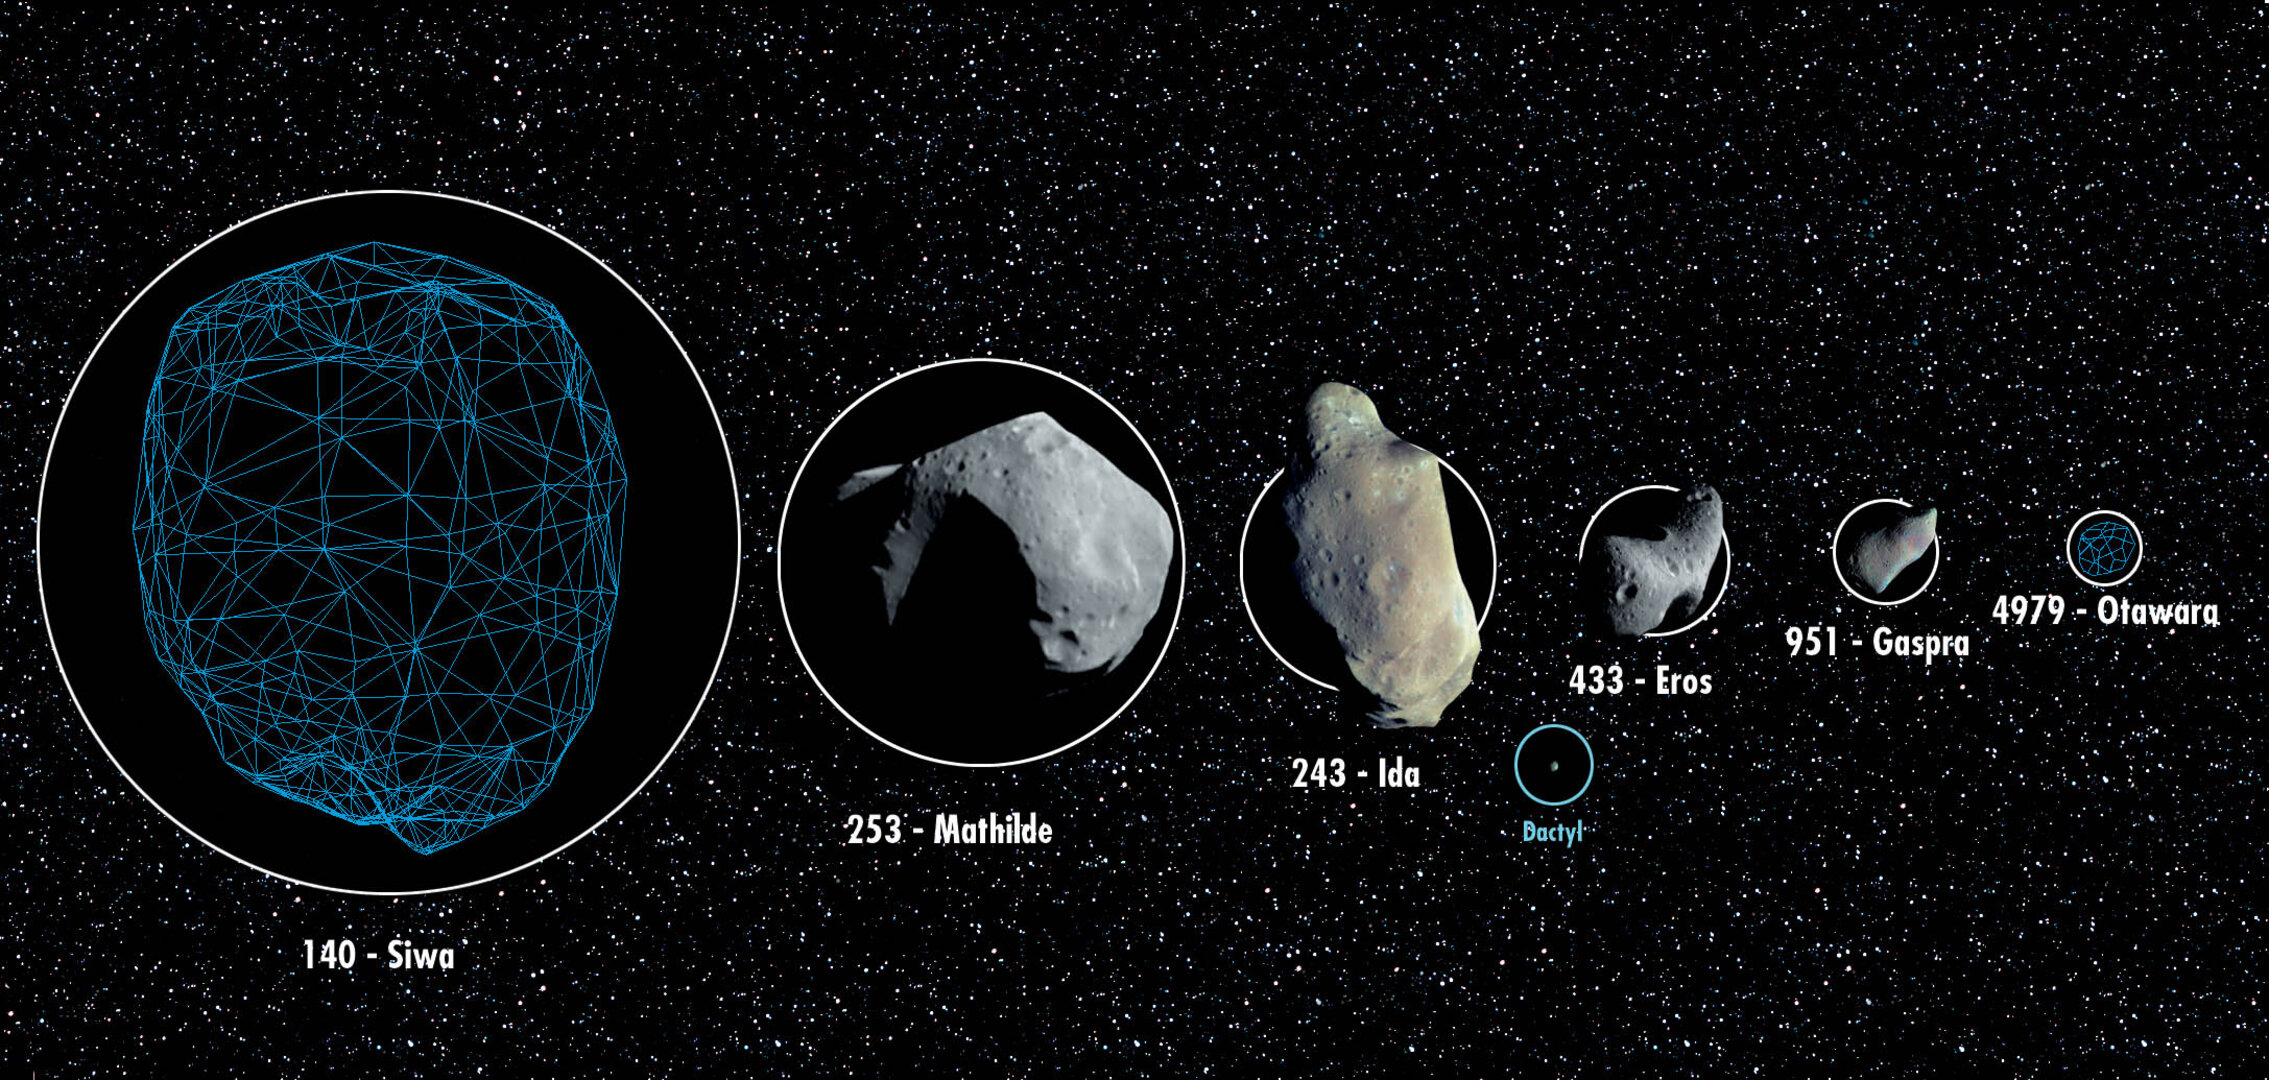 Graphic (collage) showing relative sizes of possible target asteroids and other known asteroids